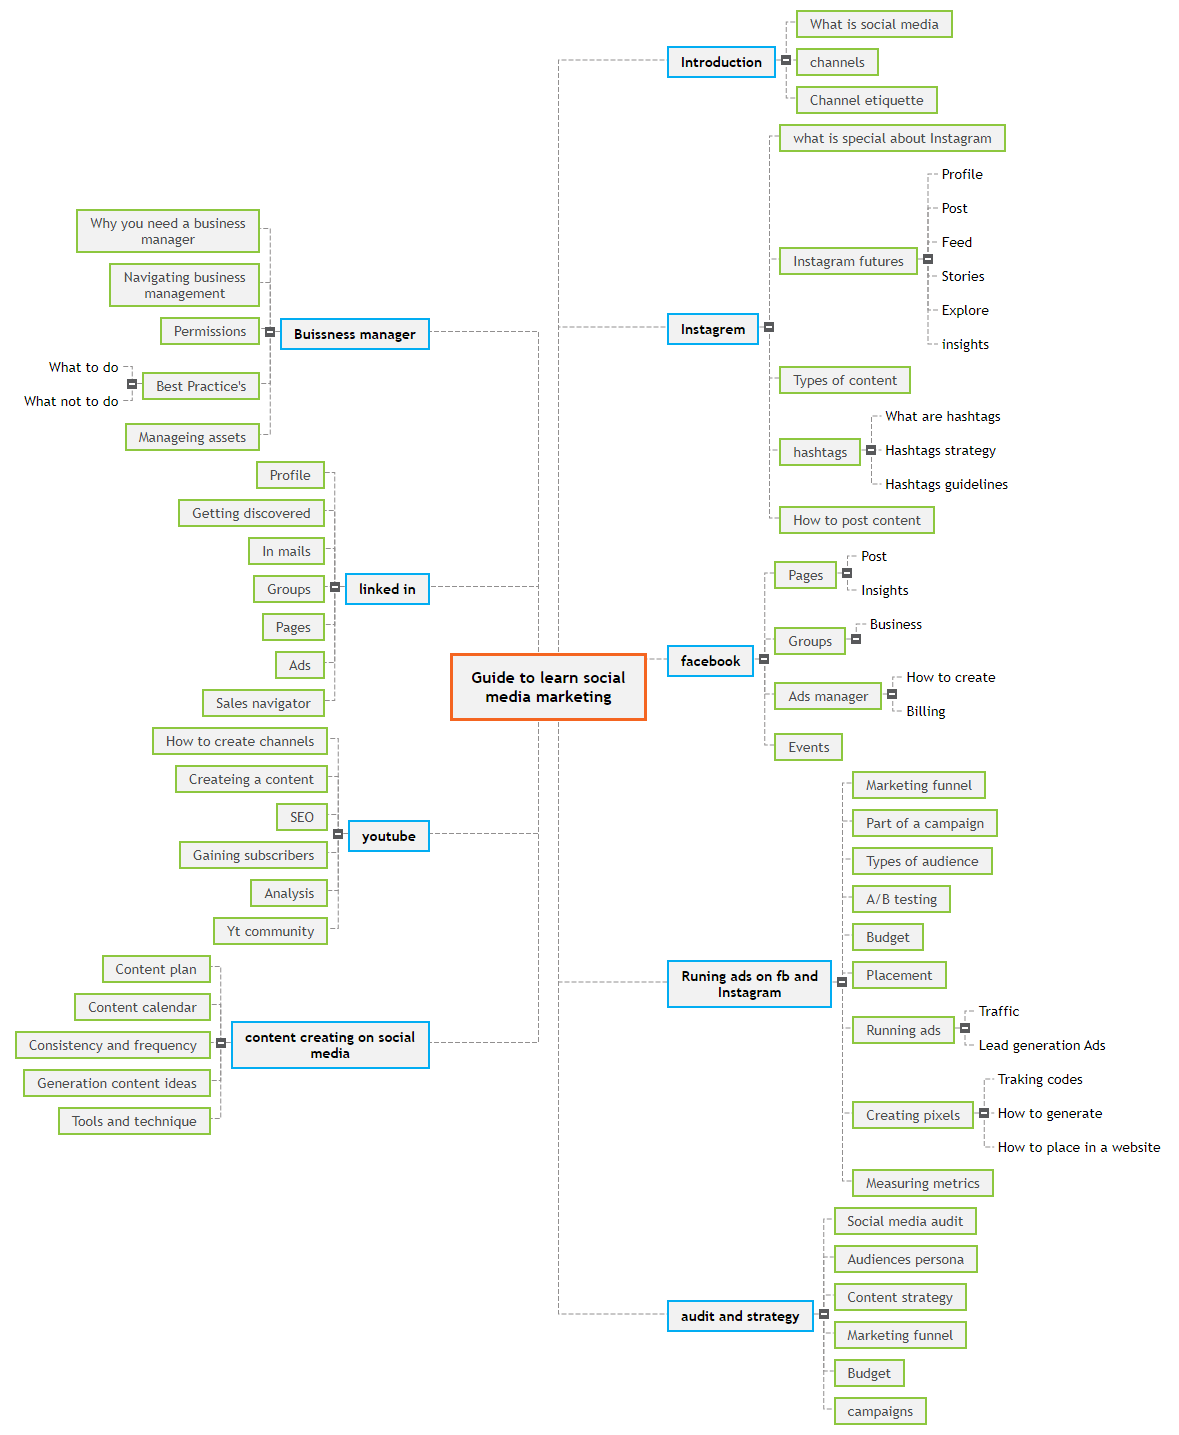 Guide to learn social media marketing1 Mind Map